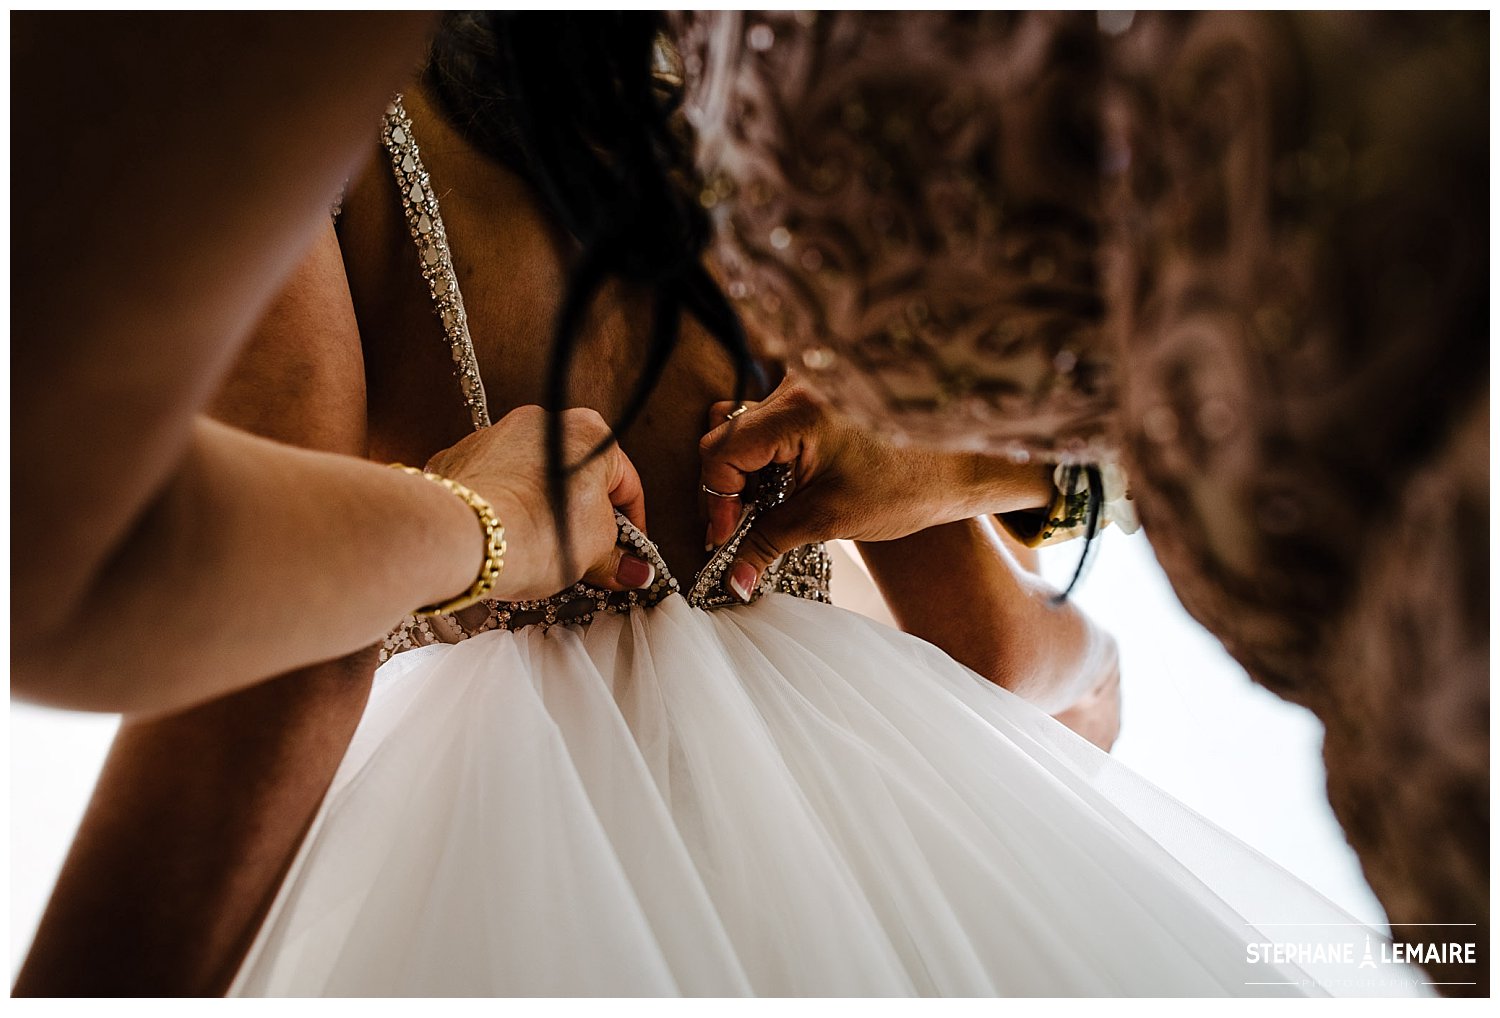 photo of bridal details by Stephane Lemaire photography